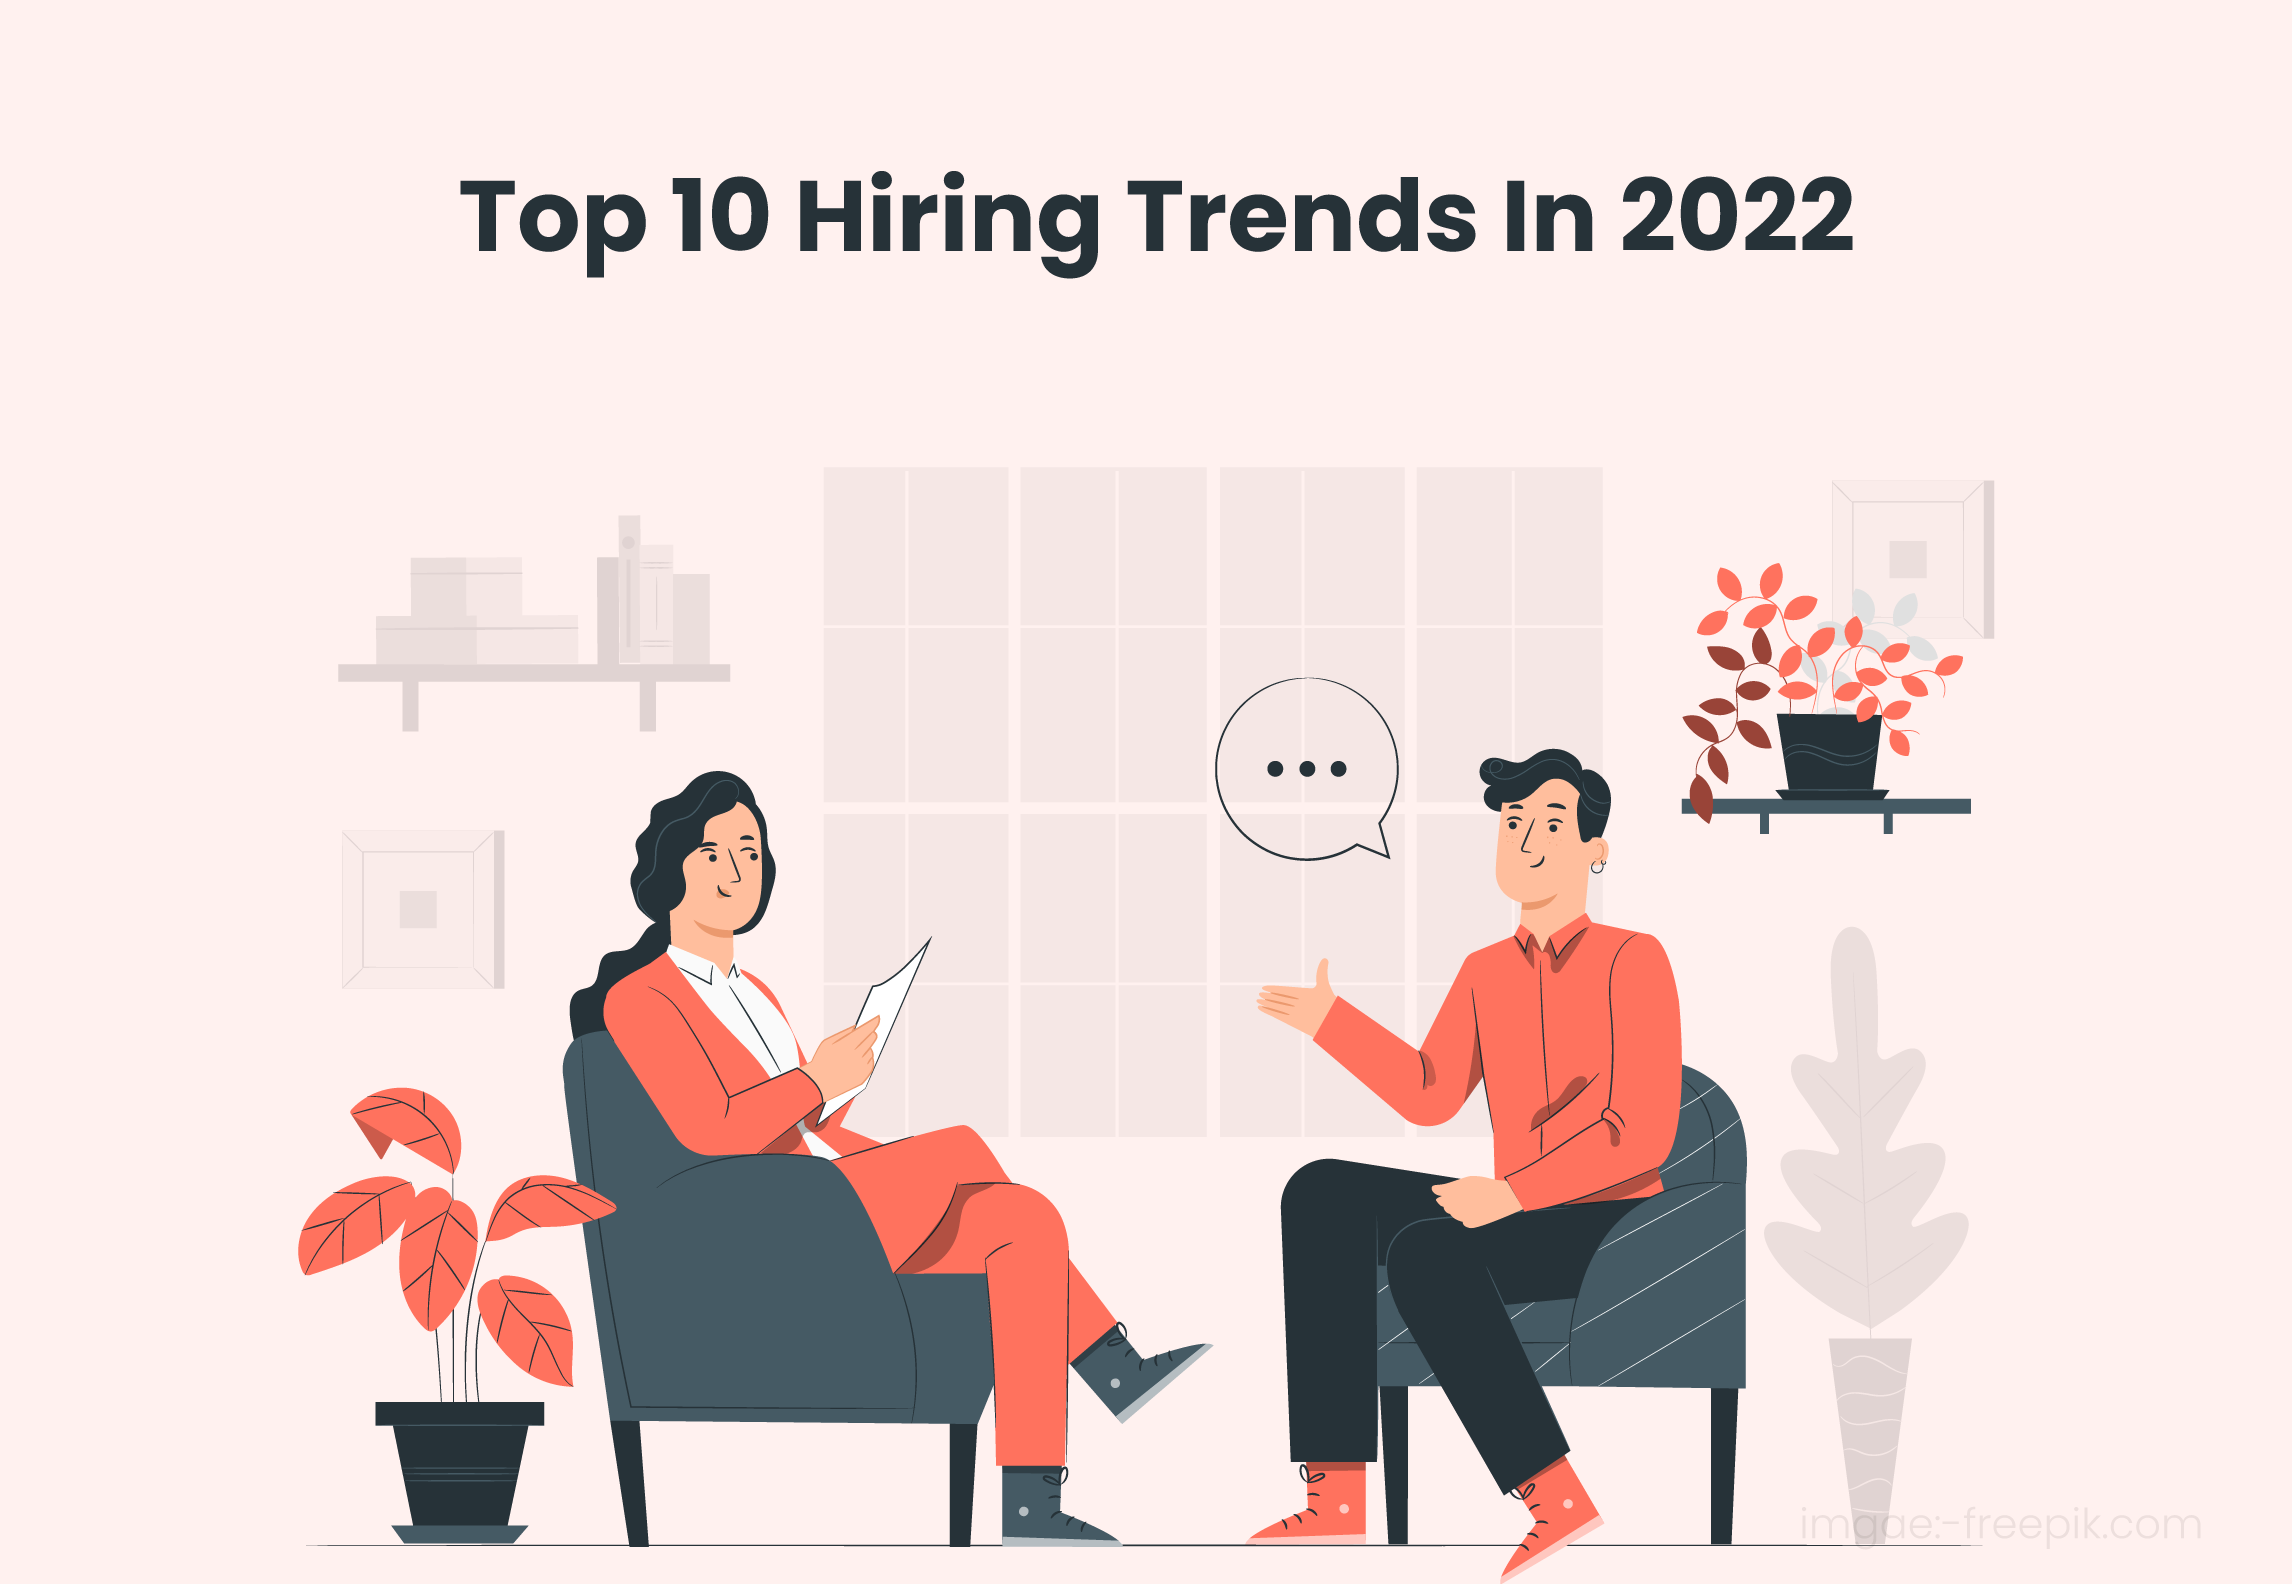 Hiring trends-2022, to rebound businesses from the turbulent stretch